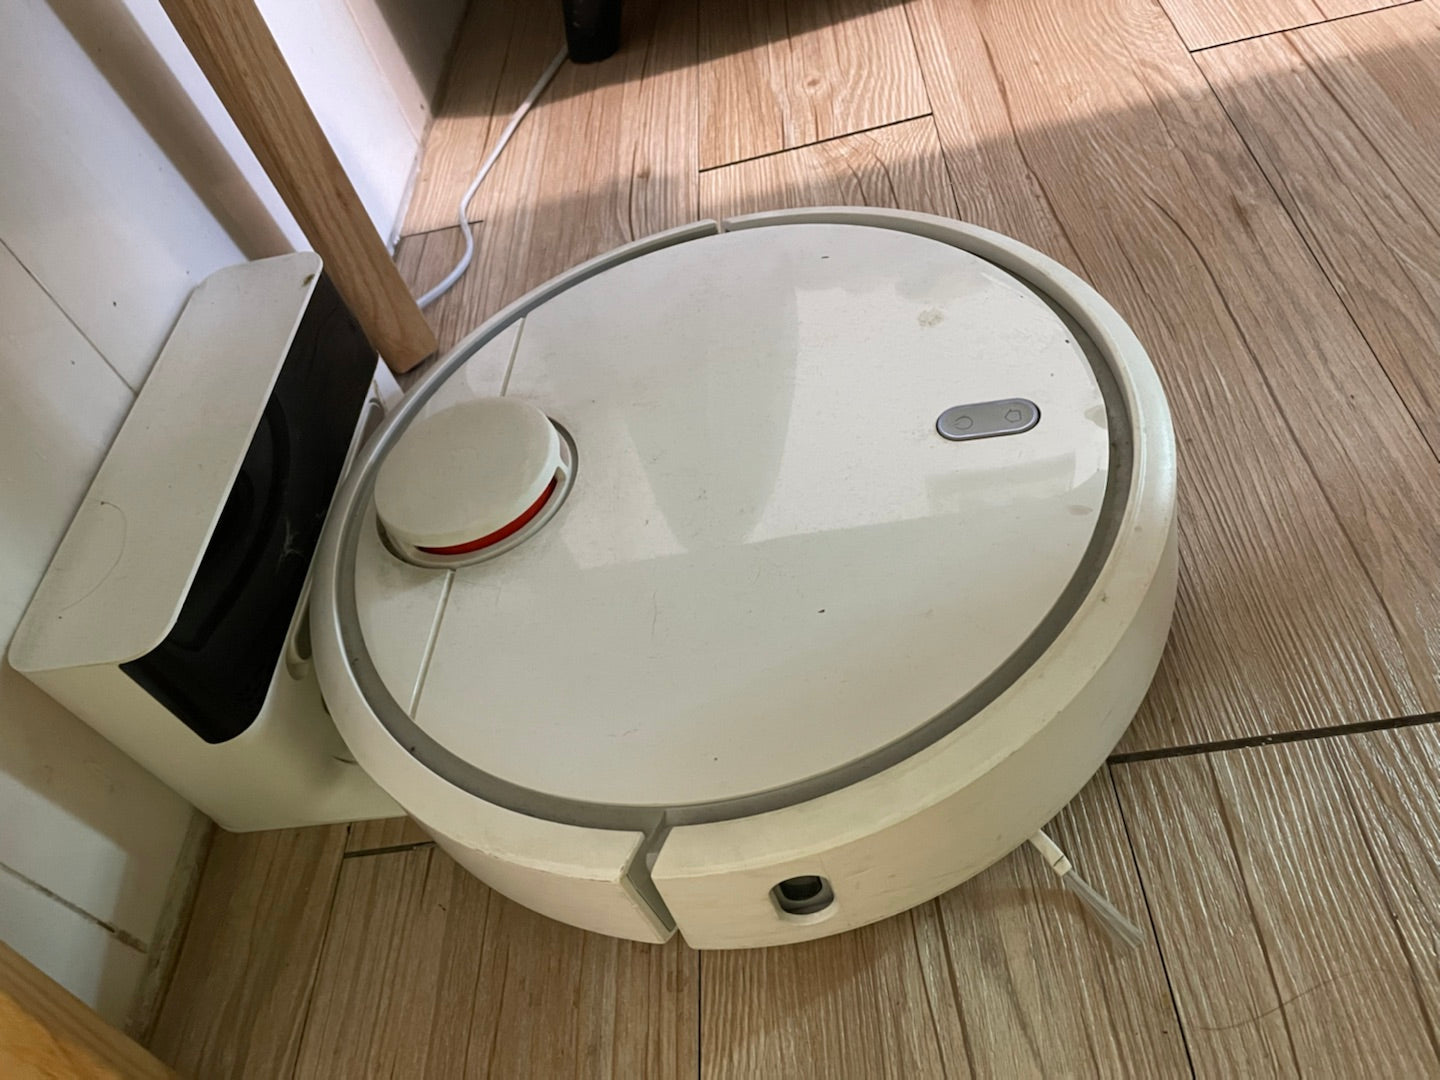 Robot Vacuums. Should You Get One?